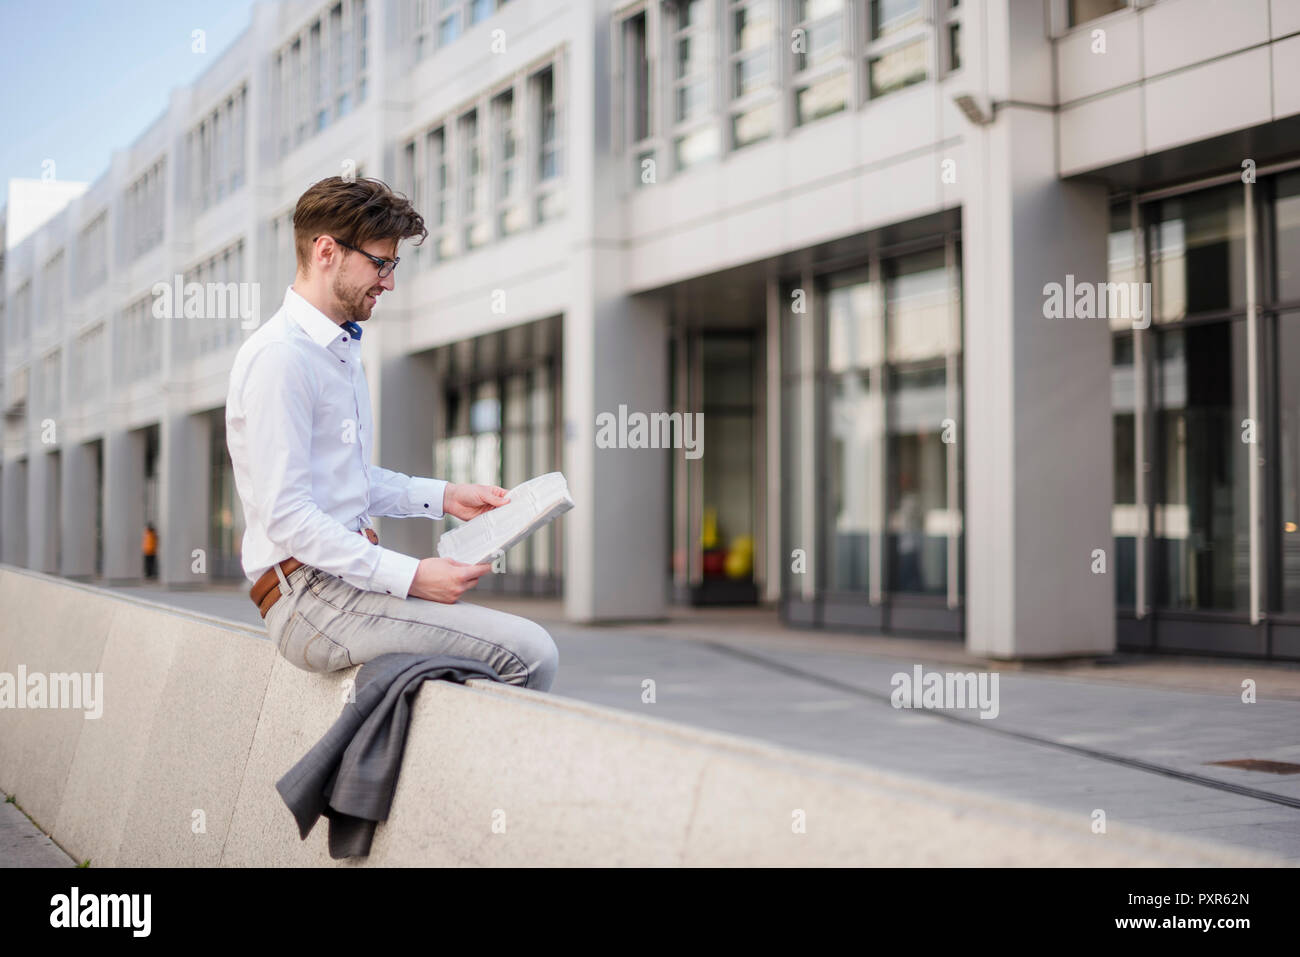 Businessman sitting in the city reading newspaper Stock Photo